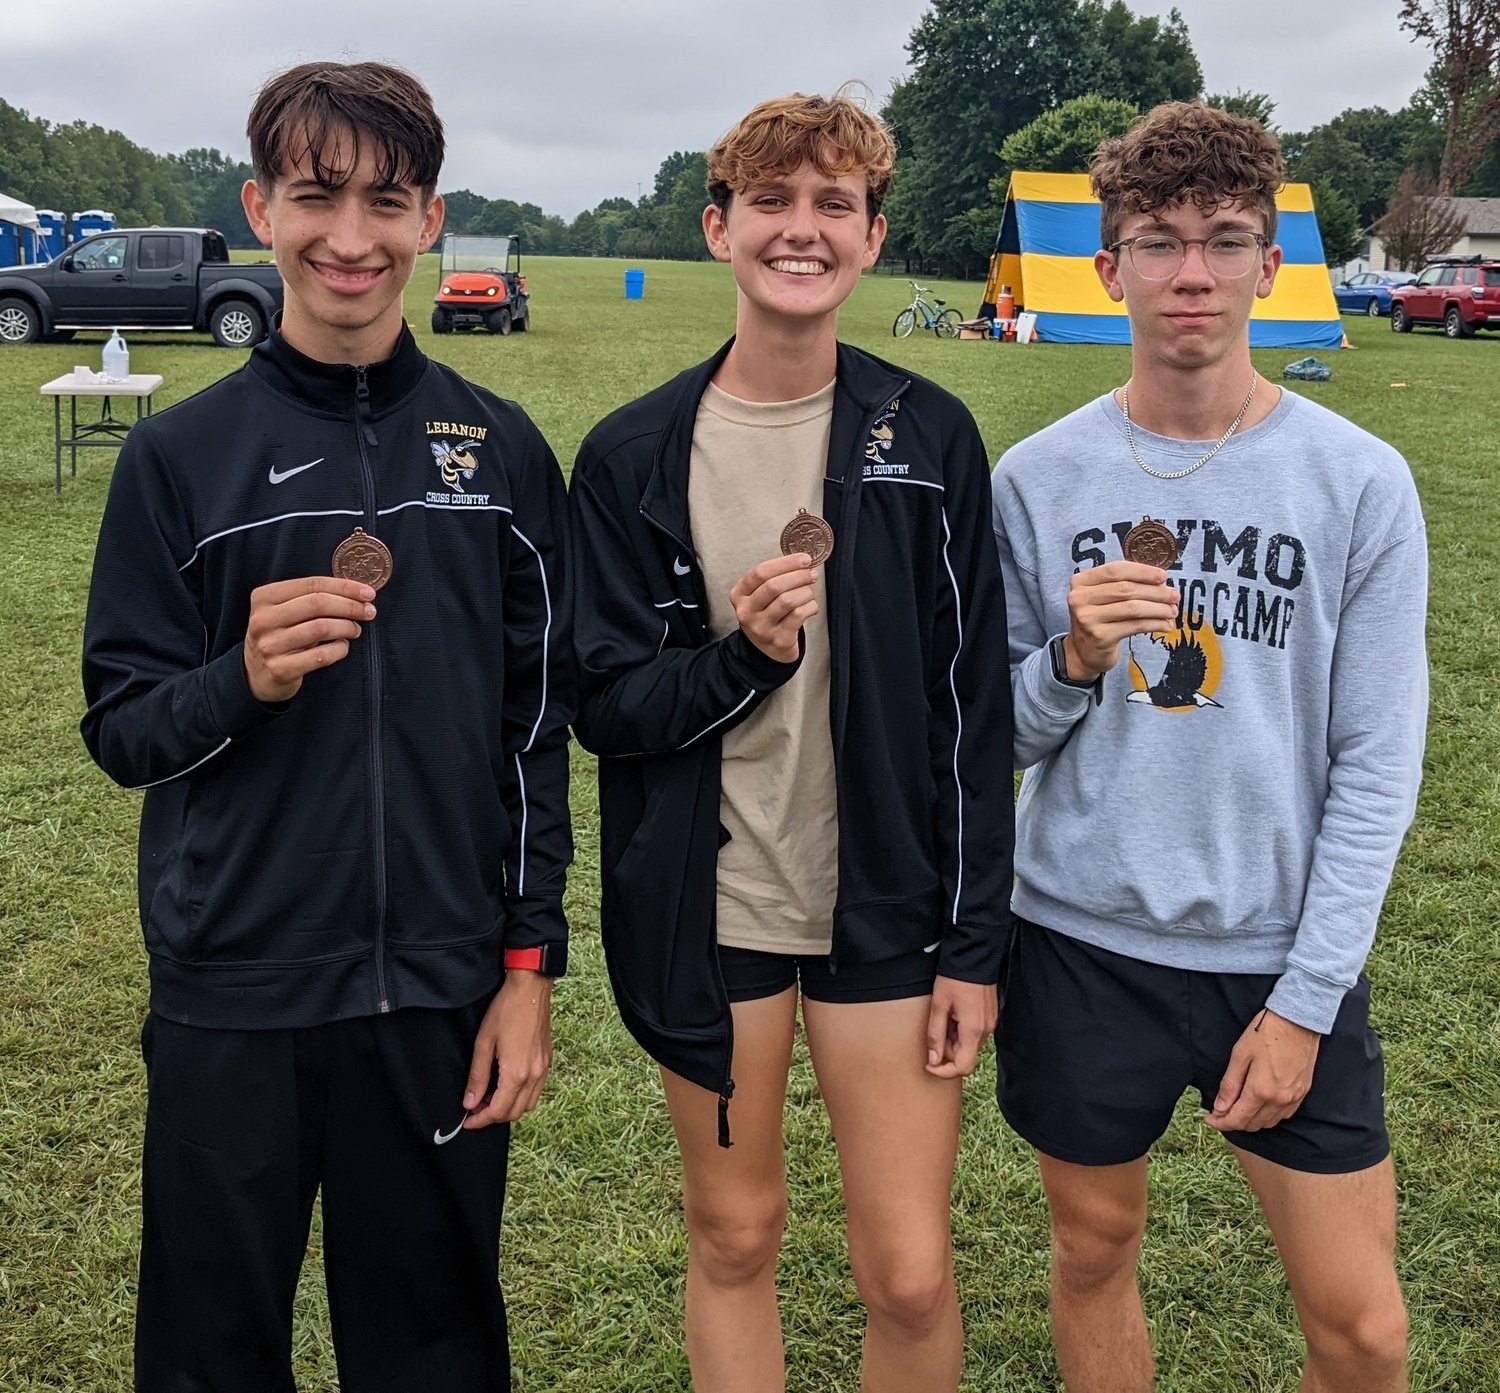 The Lebanon High School cross country team had three medalists at the Bolivar Invitational. Pictured from left, are Chris Wadley, Ella Johnson, and Peter Stunja.